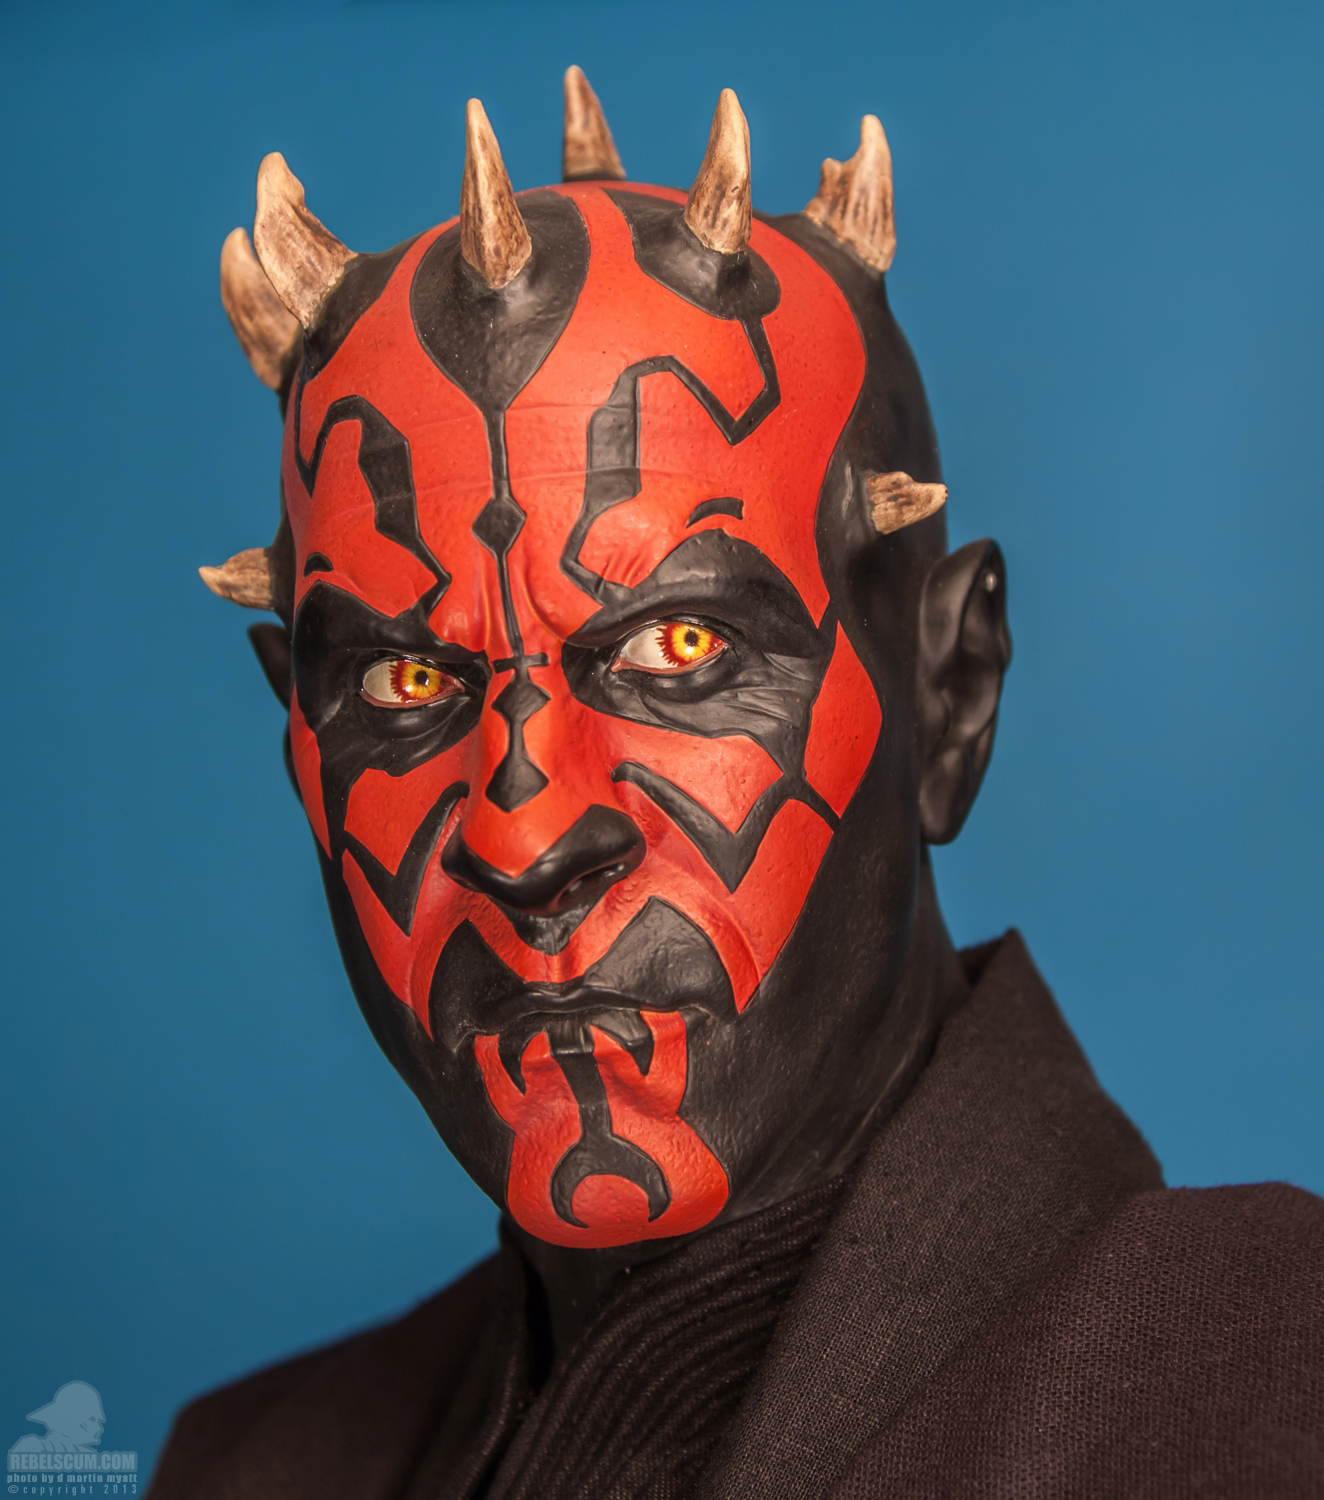 Darth_Maul_Legendary_Scale_Figure_Sideshow_Collectibles-32.jpg